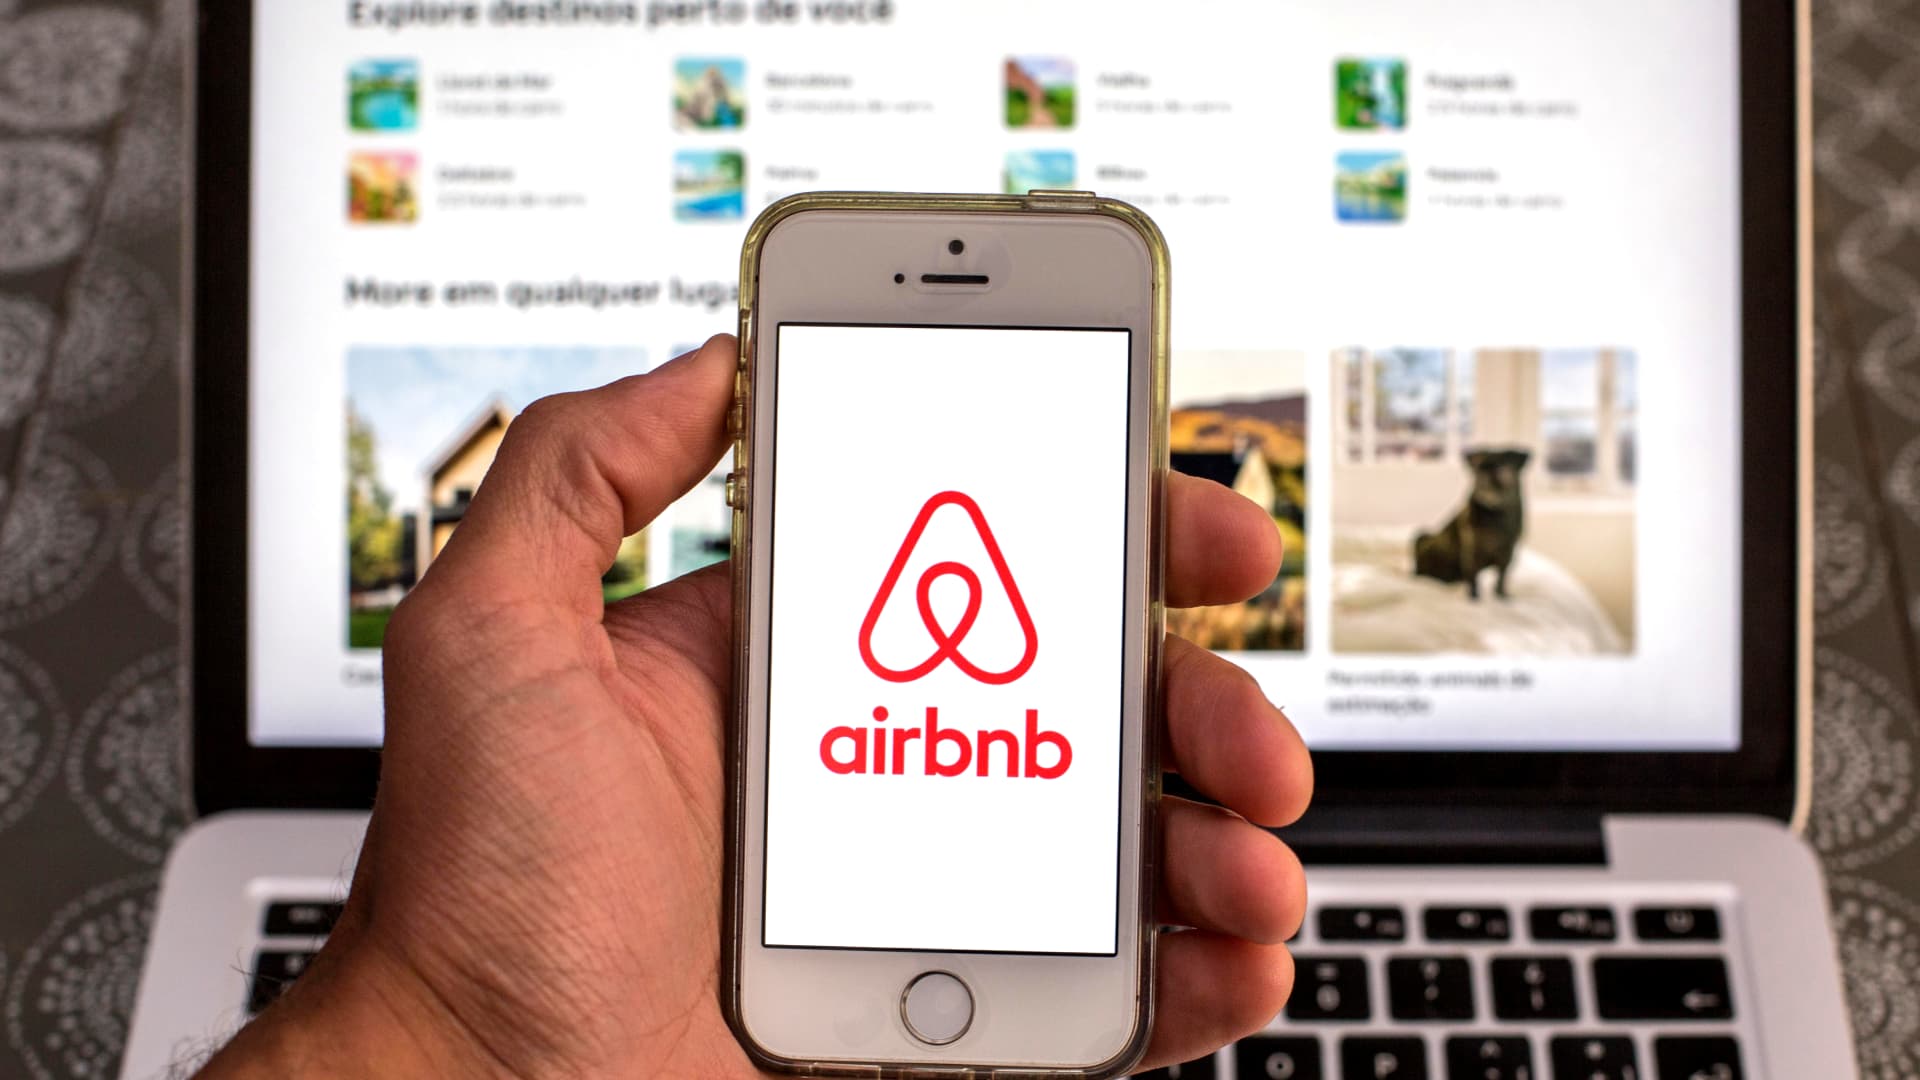 KeyBanc downgrades Airbnb, says travel demand will ease after pandemic recovery